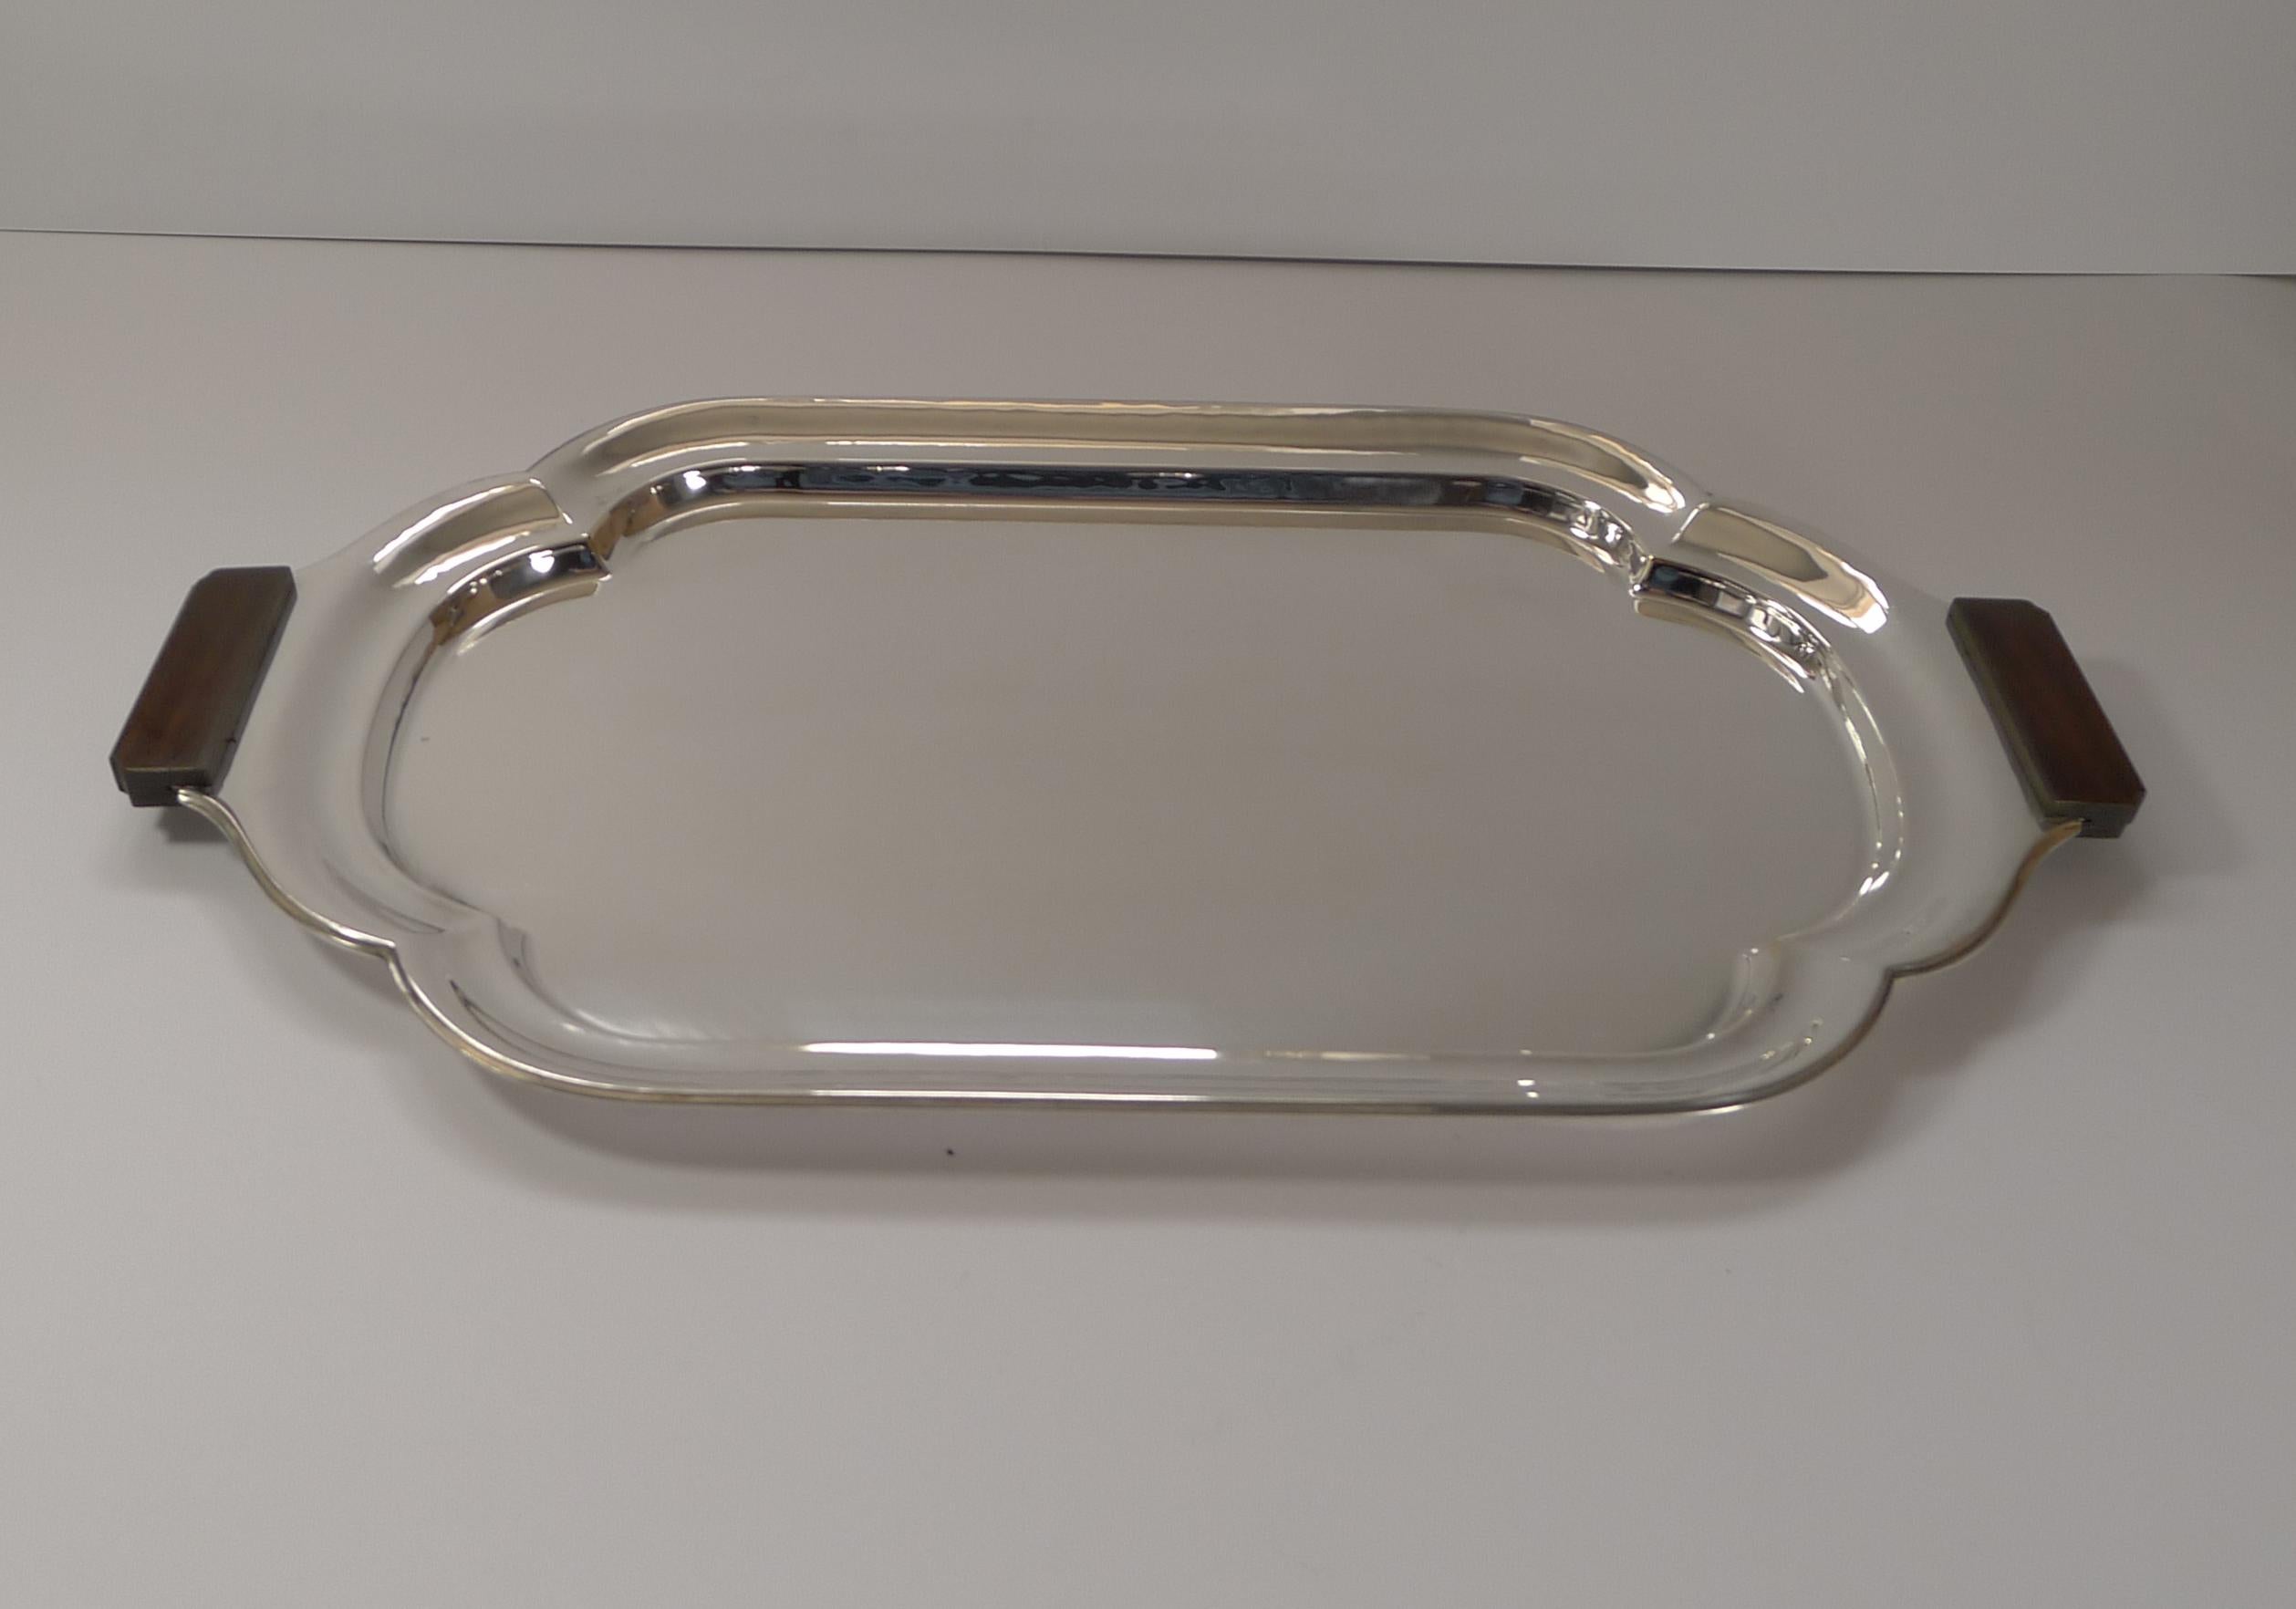 A very smart Art Deco silver plated cocktail / drinks / serving tray made from silver plate having just been through our silversmith's workshop, professionally cleaned and polished to gleam restoring it to it's former glory, dating to c.1930.

It